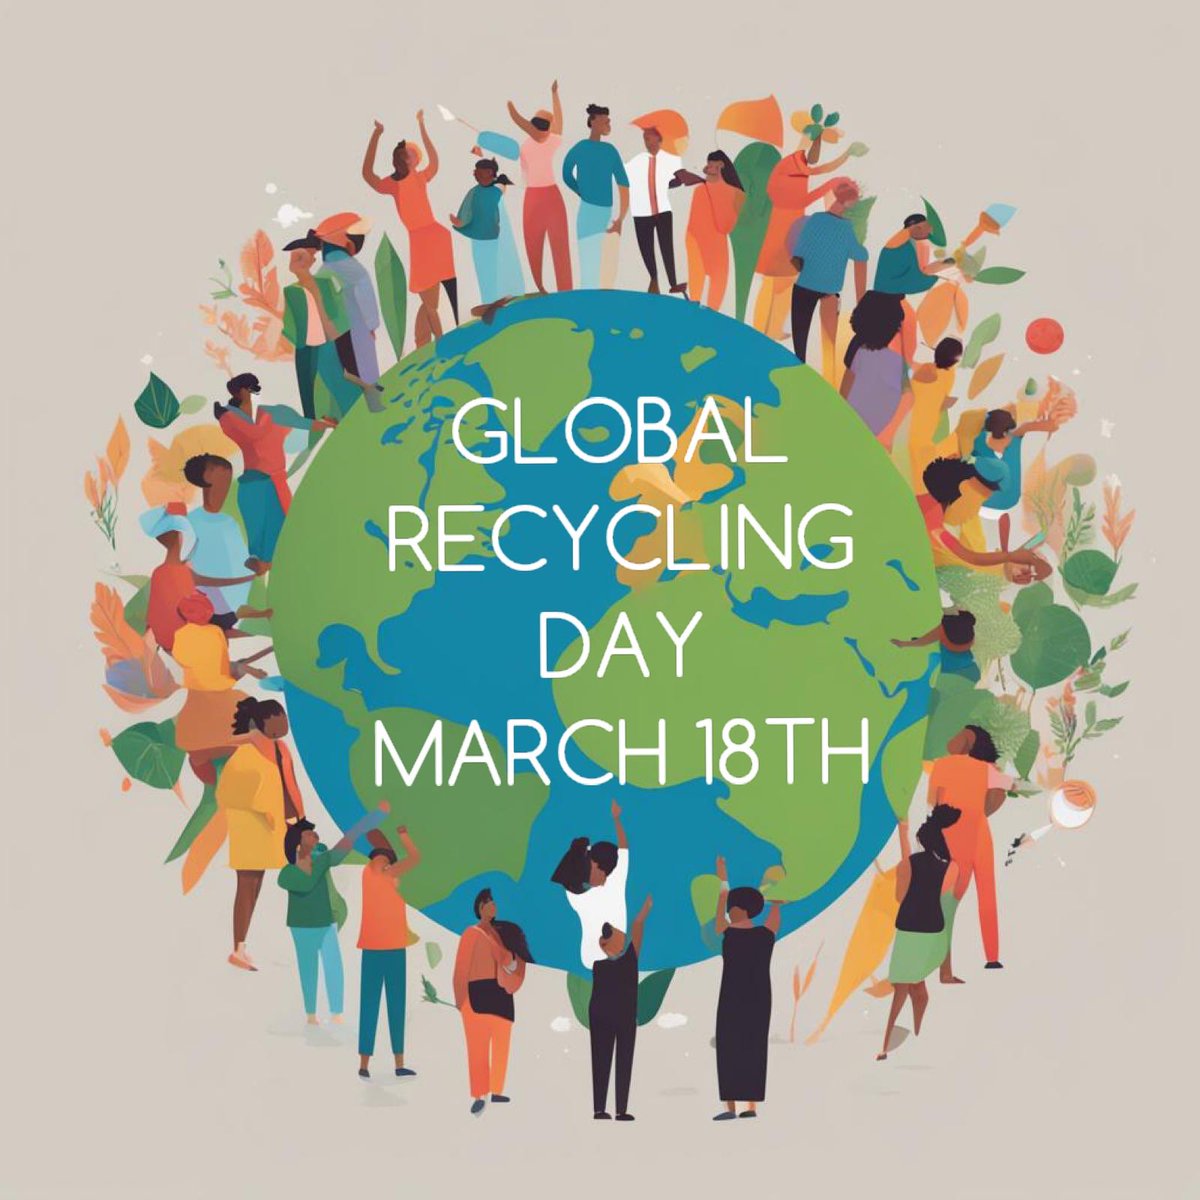 Calling all #Recyclers worldwide! Tomorrow is Global Recycling Day - Don’t miss the opportunity to seize the spotlight and showcase the importance of our industry on this impactful day. #KeepRecycling #RecreatingRawMaterials